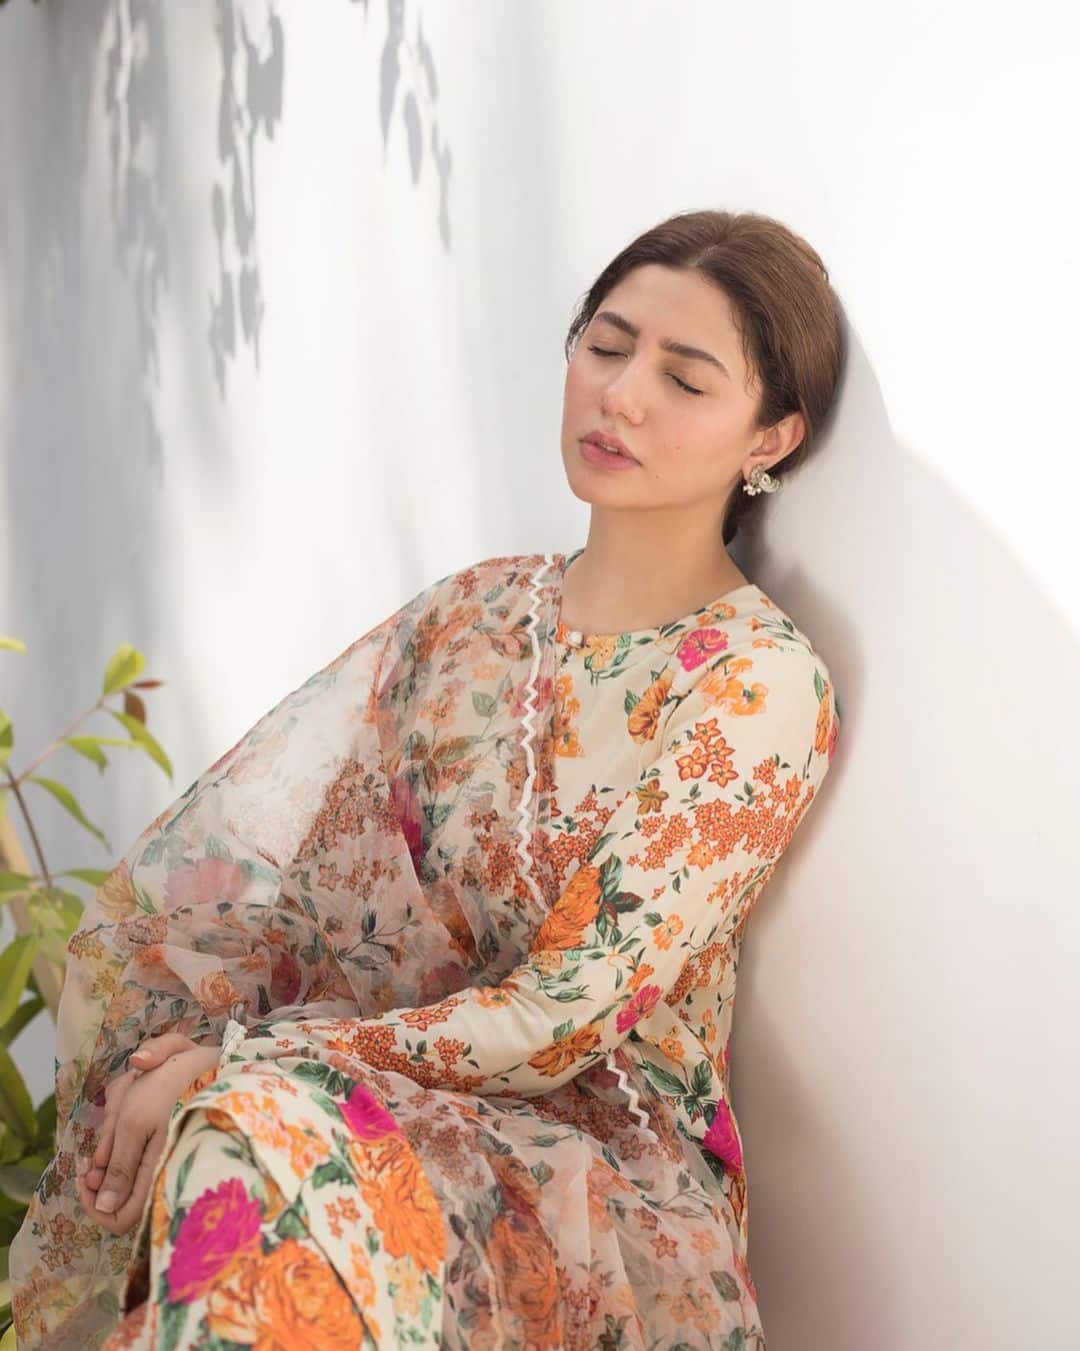 Mahira Khan is a vision to behold in latest photo shoot